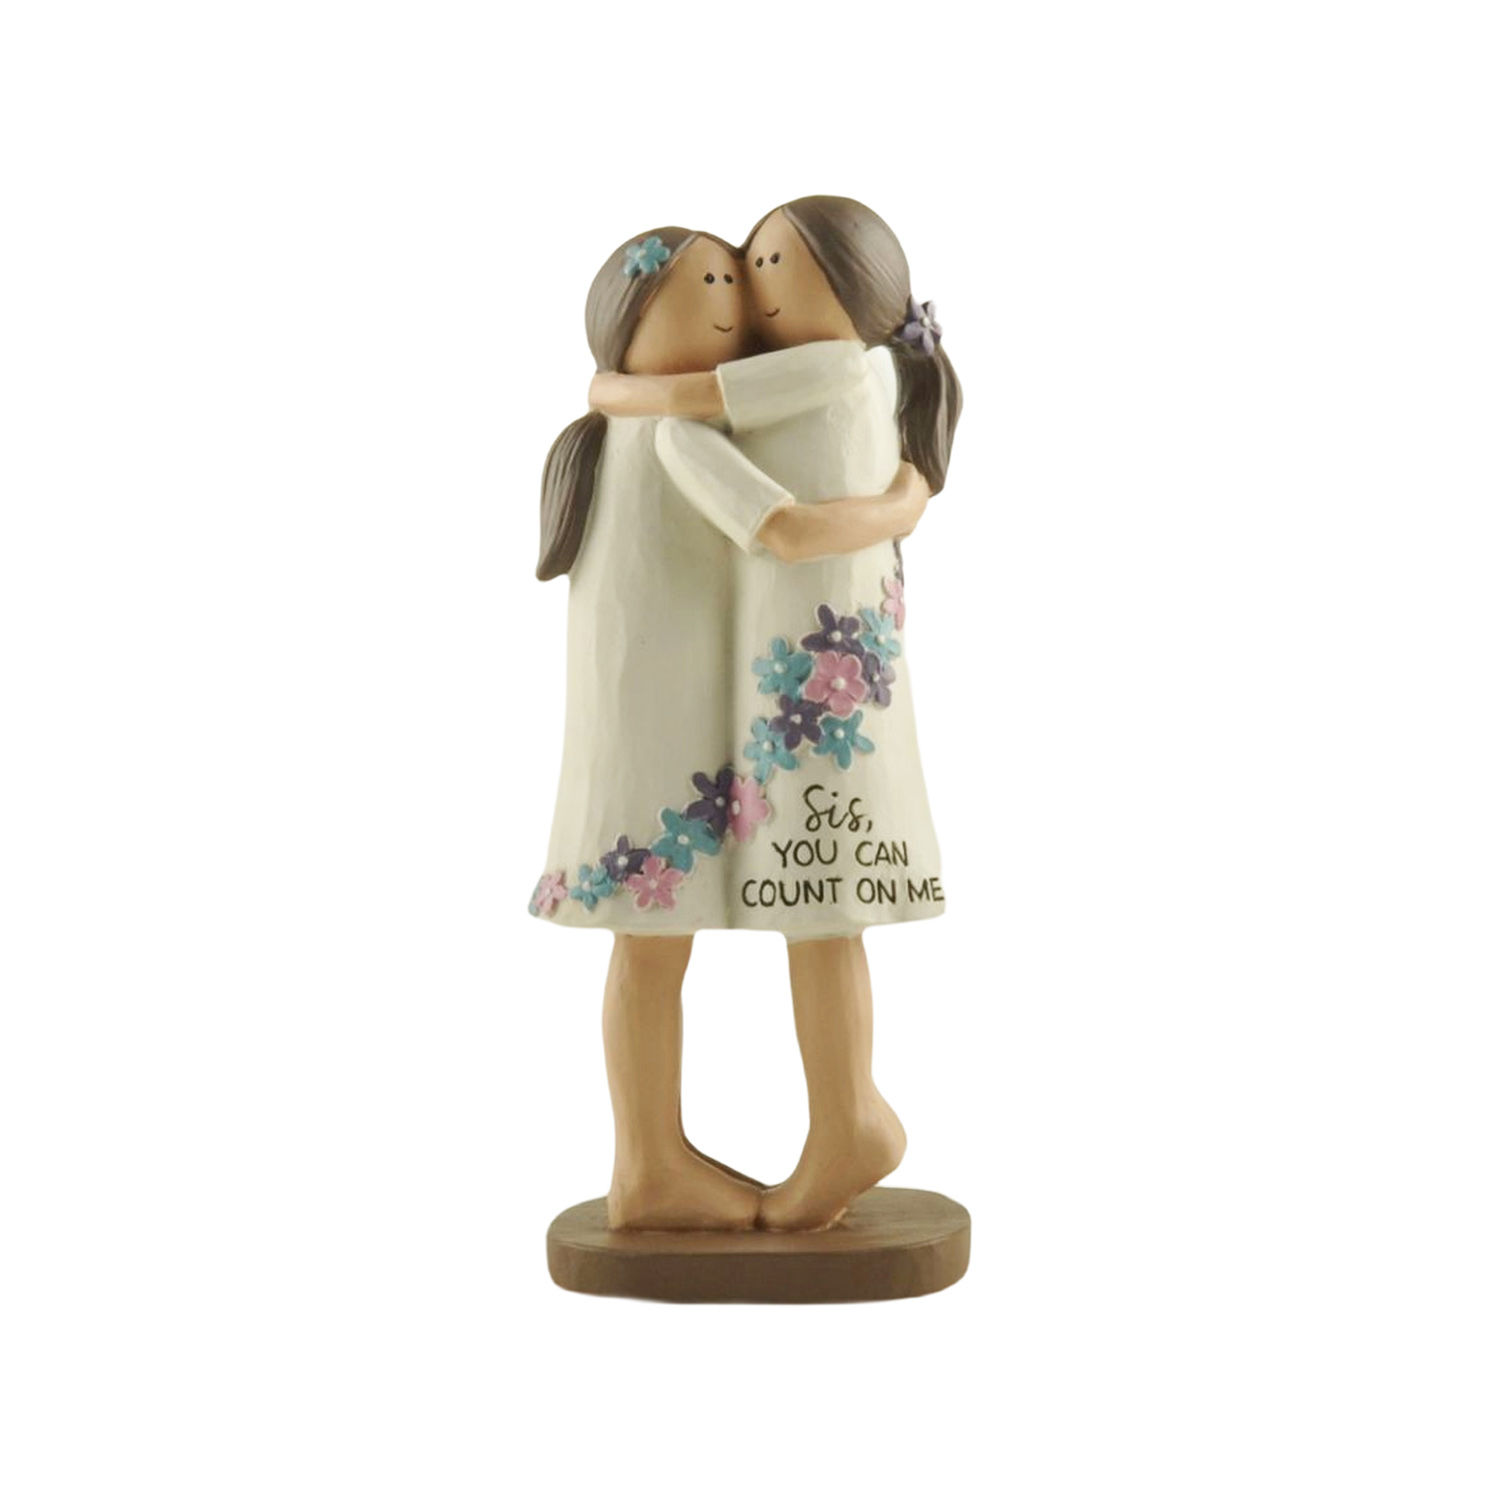 Wholesale spring Gifts Resin Angel Crafts Hugging Sisters on Base for Festival Gift231-13658